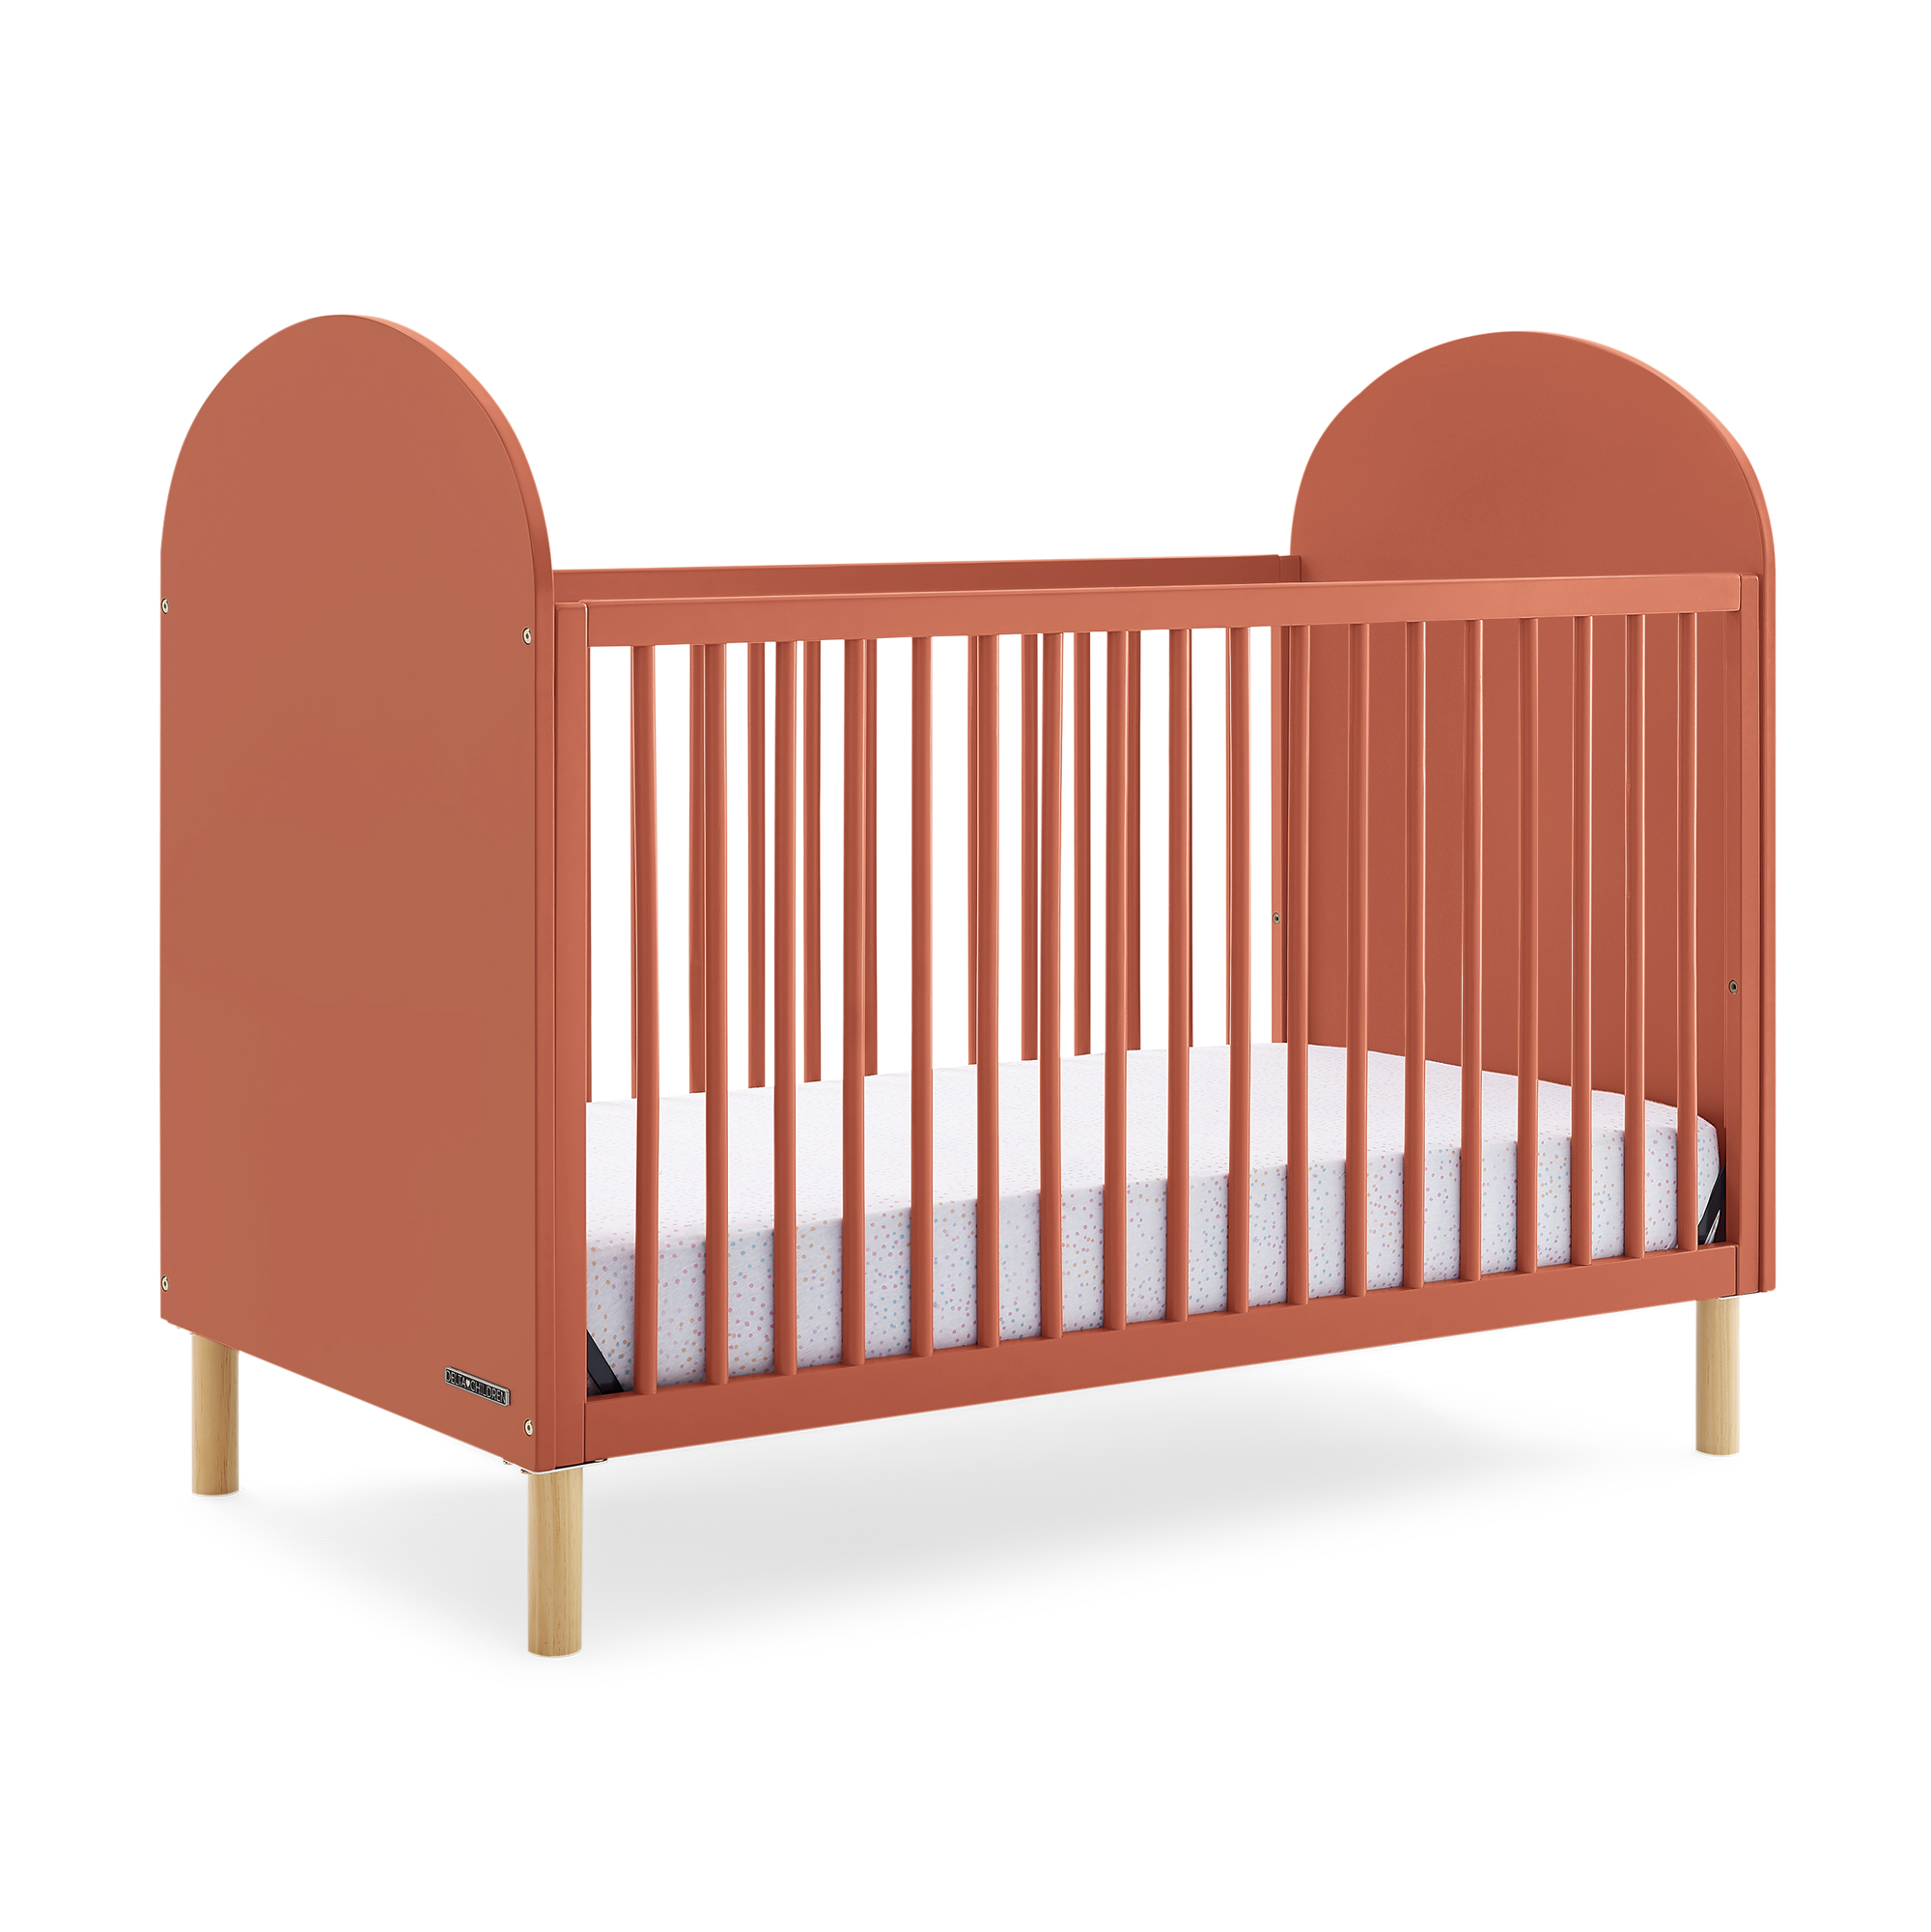 Delta Children Reese 4-in-1 Convertible Crib - Greenguard Gold Certified, Sedona/Natural - image 1 of 19